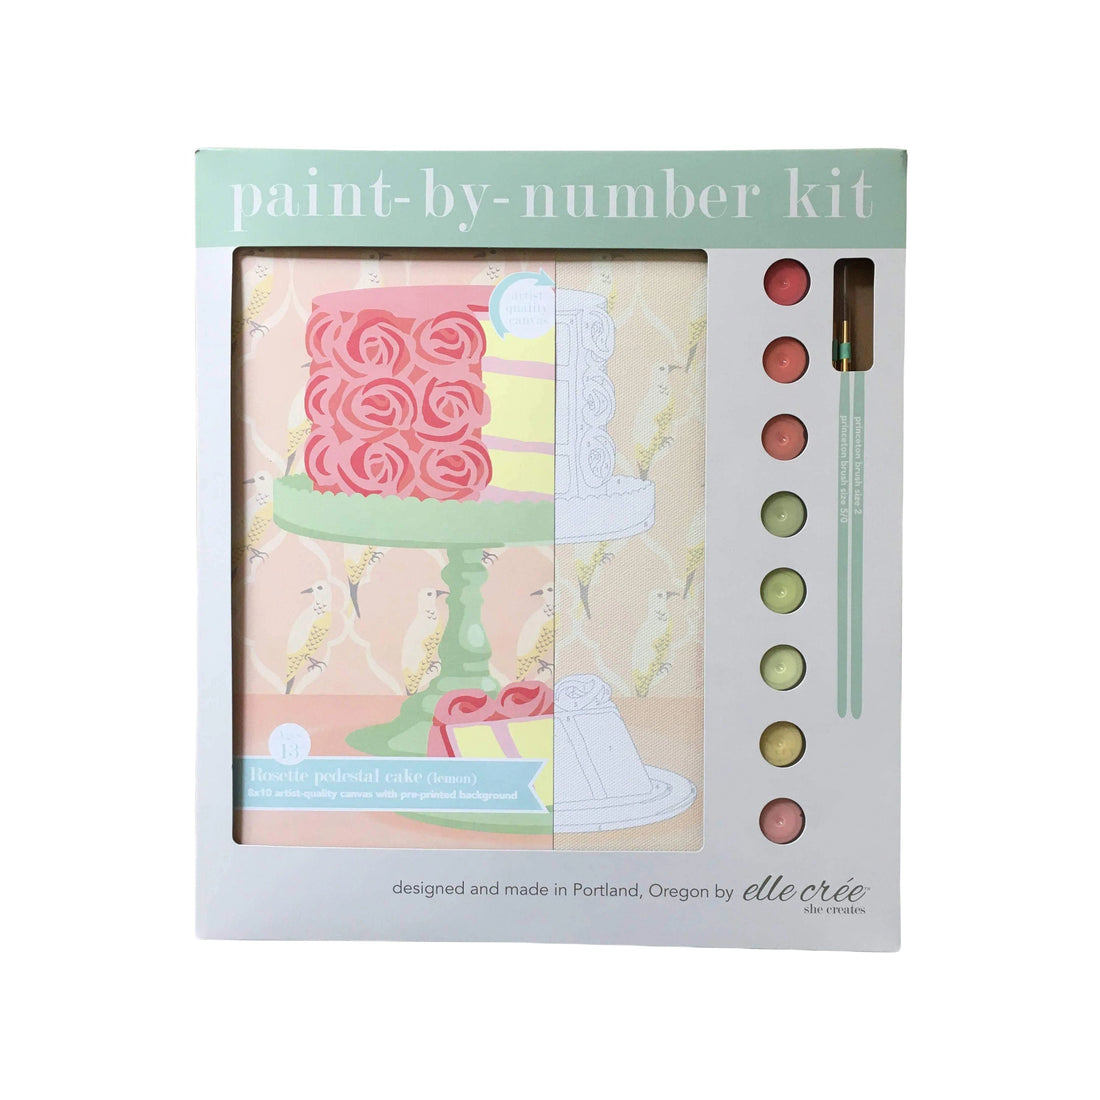 Rosette Cake Paint-by-Number Kit